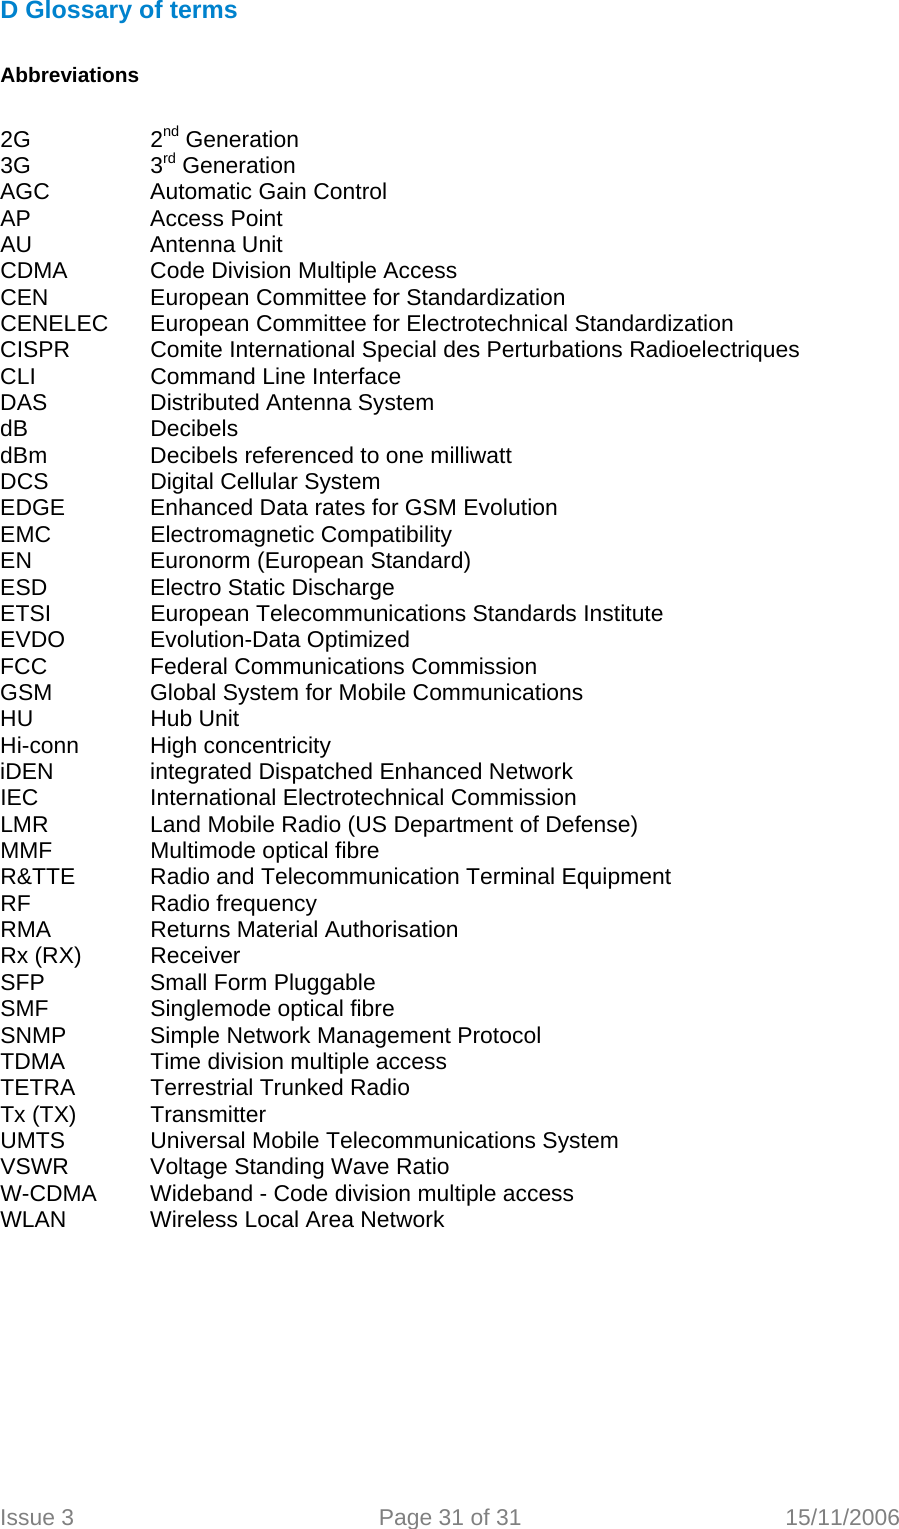  D Glossary of terms  Abbreviations  2G   2nd Generation 3G   3rd Generation AGC   Automatic Gain Control AP   Access Point AU   Antenna Unit CDMA   Code Division Multiple Access CEN   European Committee for StandardizationCENELEC  European Committee for Electrotechnical Standardization CISPR   Comite International Special des Perturbations Radioelectriques CLI    Command Line Interface DAS   Distributed Antenna System dB   Decibels dBm    Decibels referenced to one milliwatt DCS    Digital Cellular System EDGE    Enhanced Data rates for GSM Evolution EMC   Electromagnetic Compatibility EN    Euronorm (European Standard) ESD    Electro Static Discharge ETSI    European Telecommunications Standards Institute EVDO   Evolution-Data Optimized FCC    Federal Communications Commission GSM    Global System for Mobile Communications HU   Hub Unit Hi-conn High concentricity iDEN    integrated Dispatched Enhanced Network IEC    International Electrotechnical Commission LMR    Land Mobile Radio (US Department of Defense) MMF    Multimode optical fibre R&amp;TTE  Radio and Telecommunication Terminal Equipment RF   Radio frequency RMA    Returns Material Authorisation Rx (RX)  Receiver SFP   Small Form Pluggable SMF    Singlemode optical fibre SNMP   Simple Network Management Protocol TDMA    Time division multiple access TETRA  Terrestrial Trunked Radio Tx (TX)  Transmitter UMTS    Universal Mobile Telecommunications System VSWR   Voltage Standing Wave Ratio W-CDMA  Wideband - Code division multiple access   WLAN   Wireless Local Area Network   Issue 3  Page 31 of 31  15/11/2006   